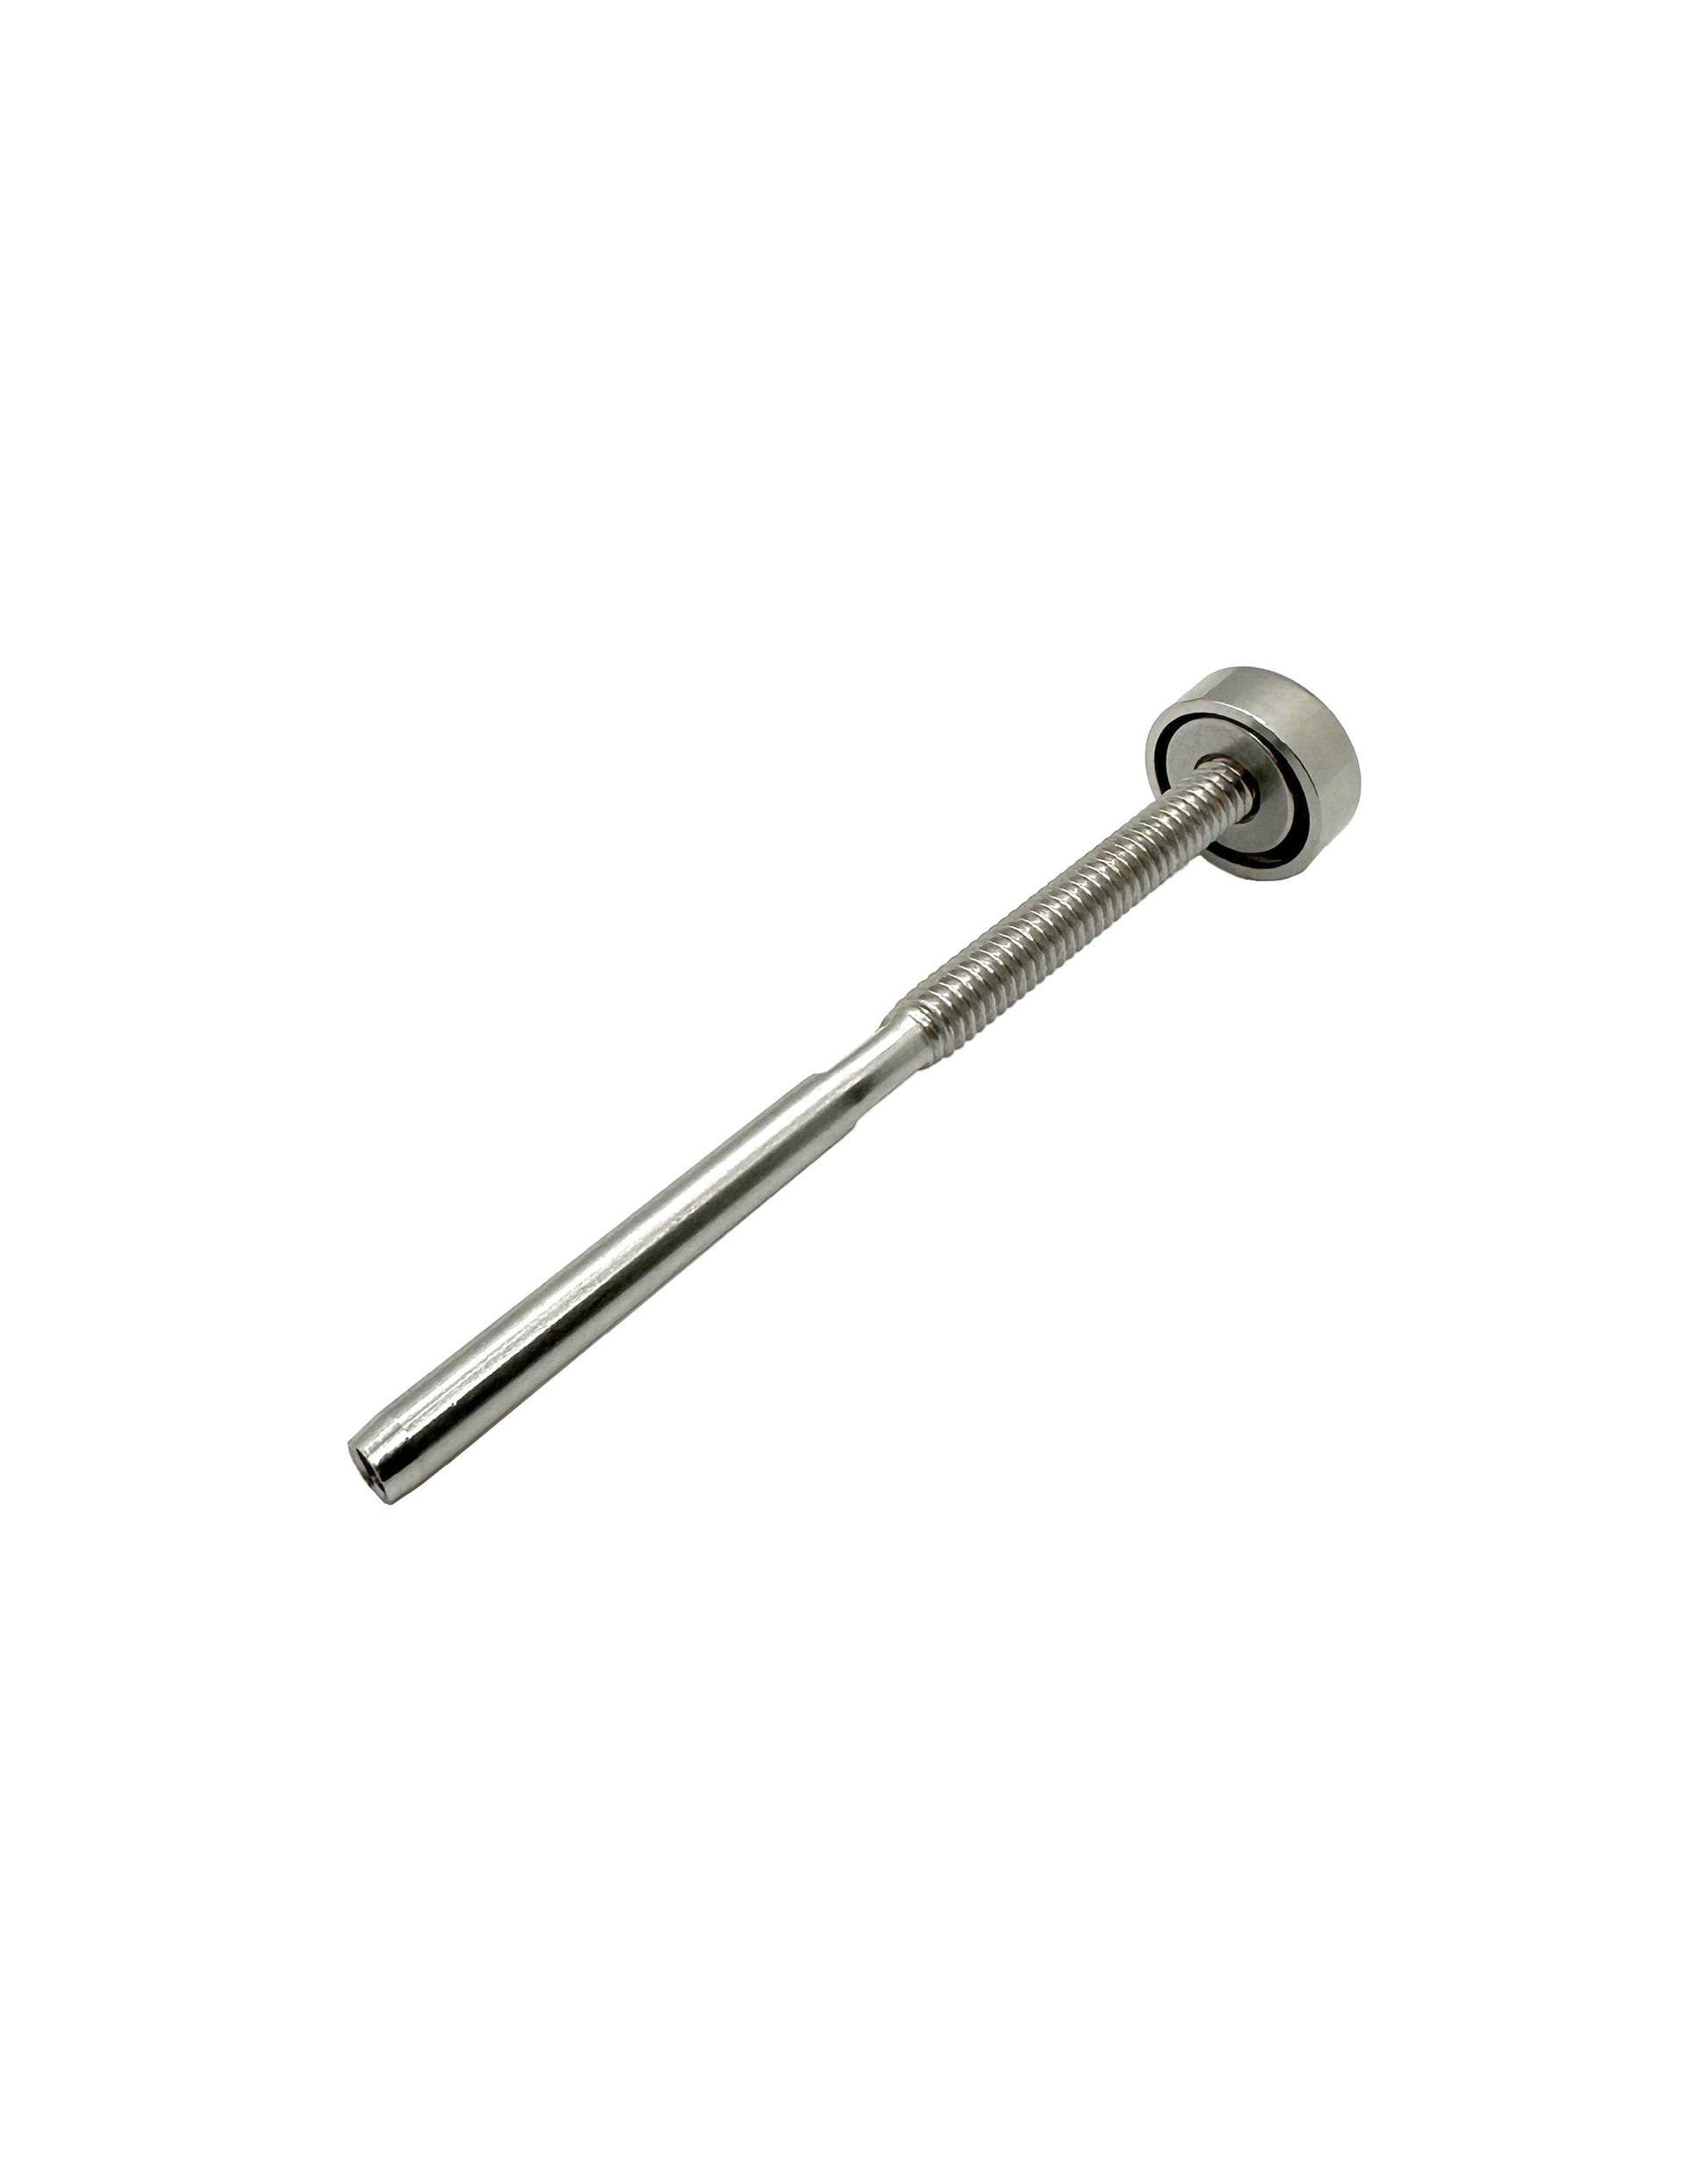 Round Snap End Cap and Nut for Swage Tensioner (C0095) - SHEMONICO